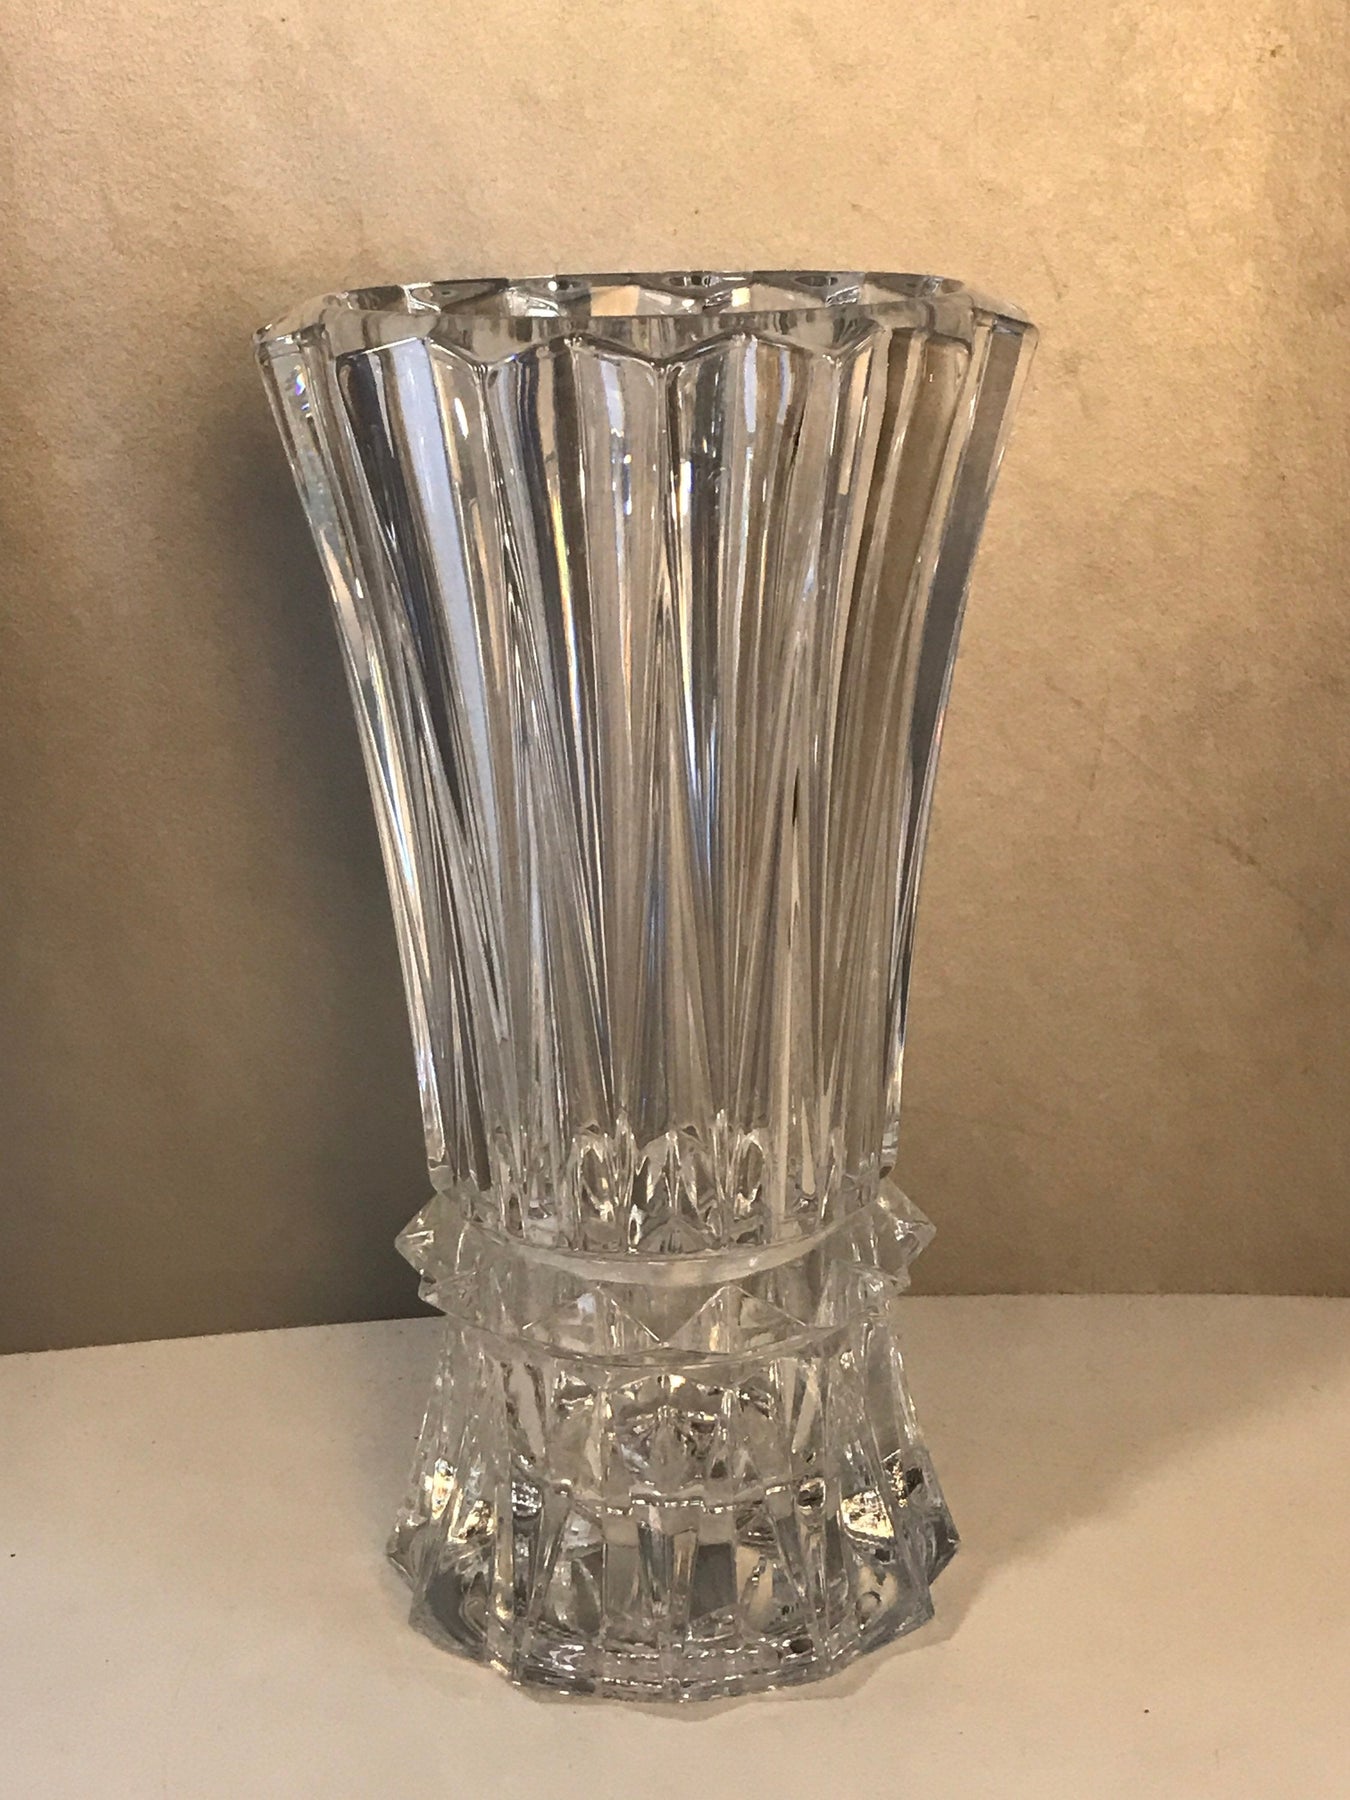 Vintage Wide Mouth Glass Bowl Diamond Crystal Shaped Stems 